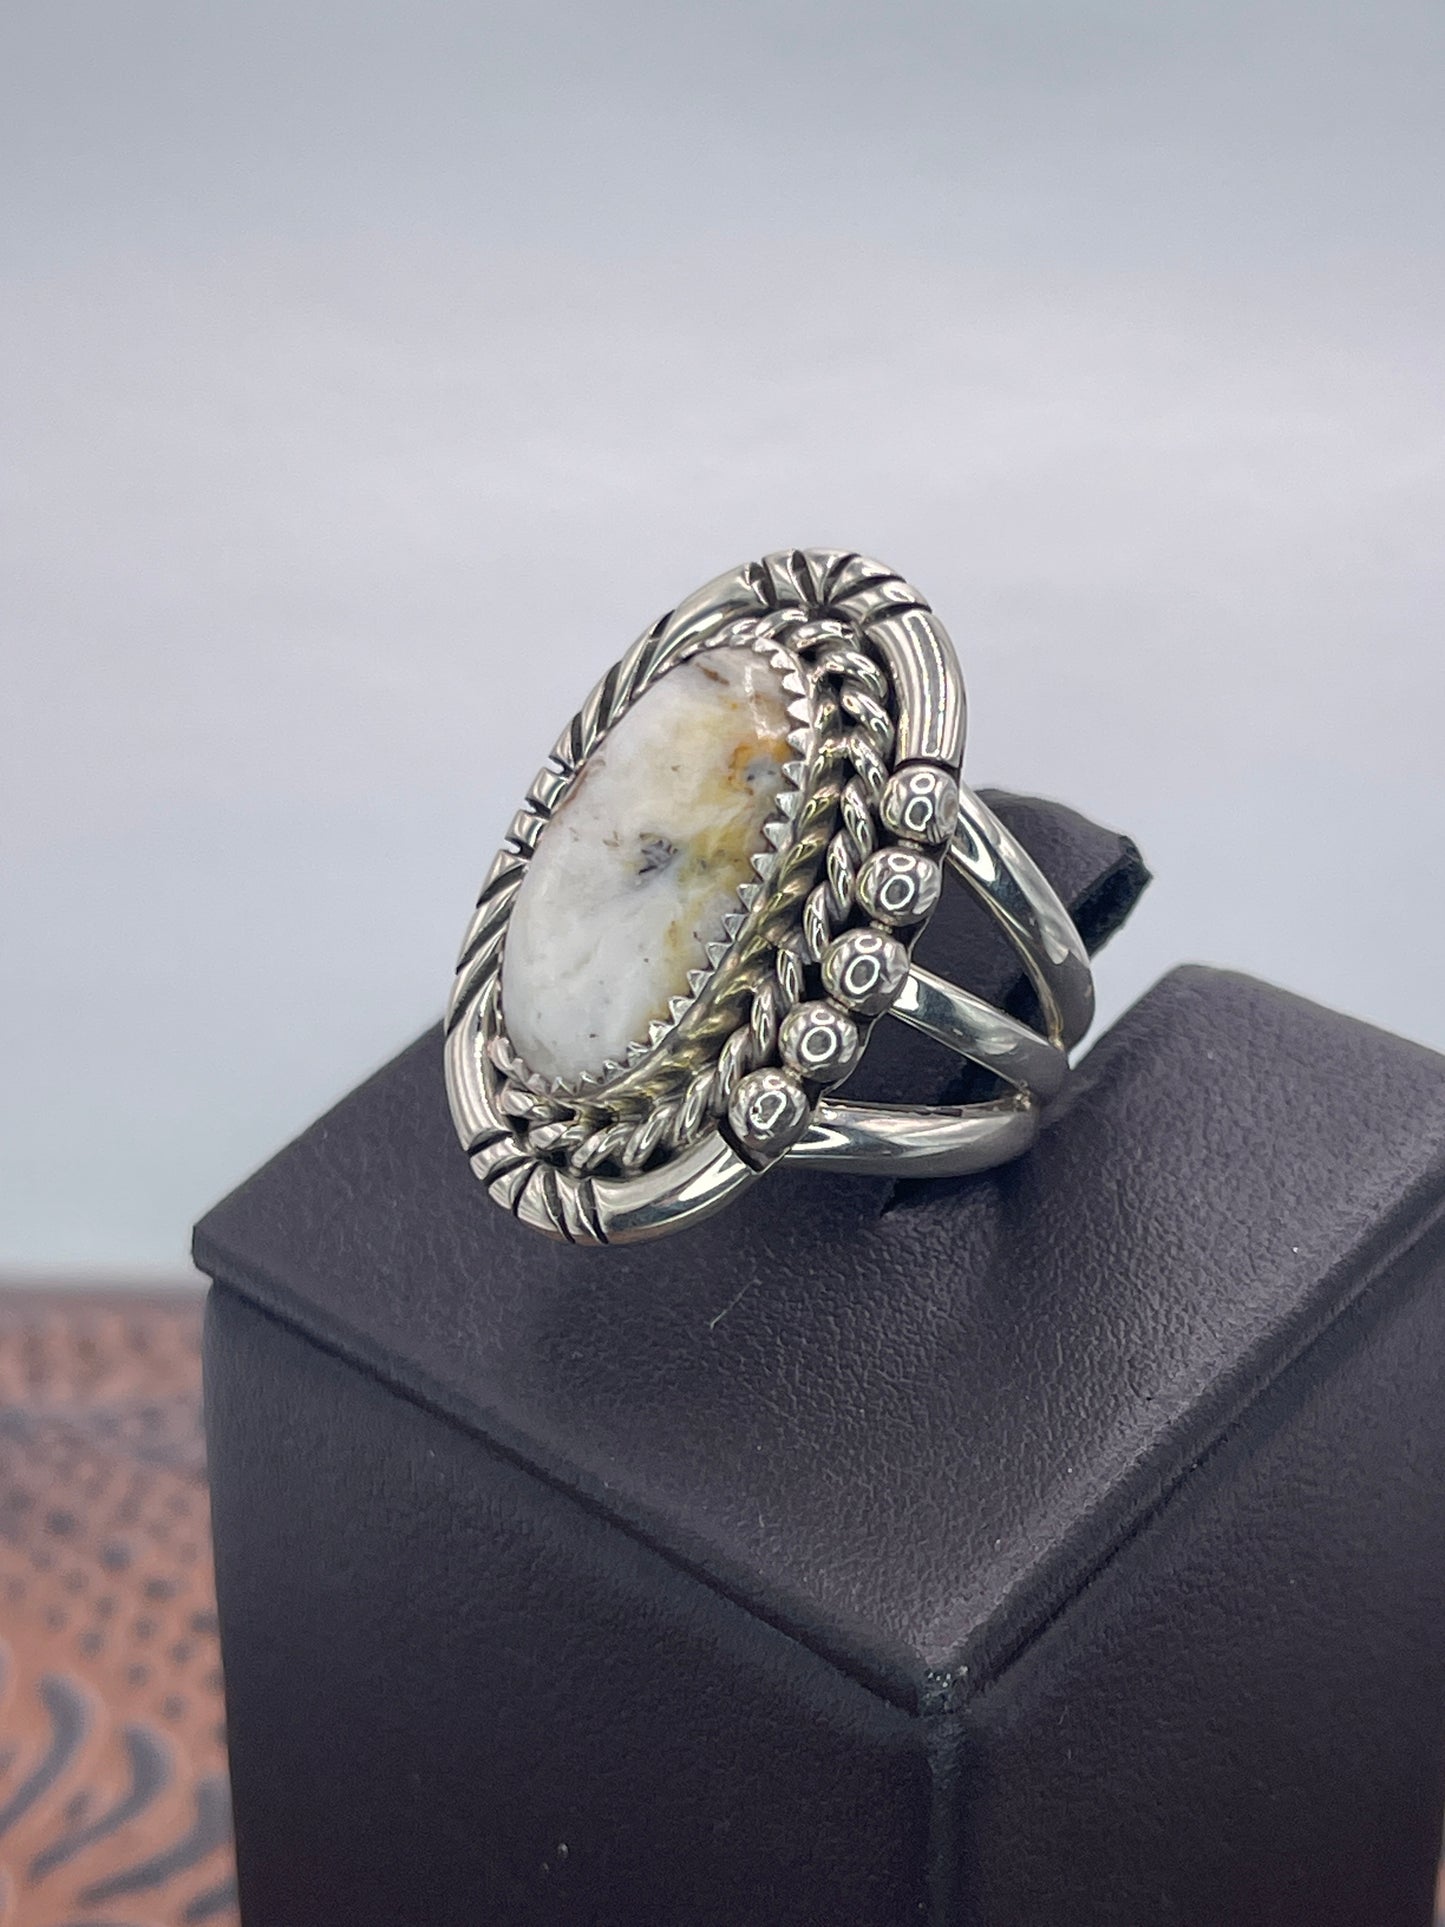 Desert Treasure: White and Black Oval Stone set in Sterling Silver Ring